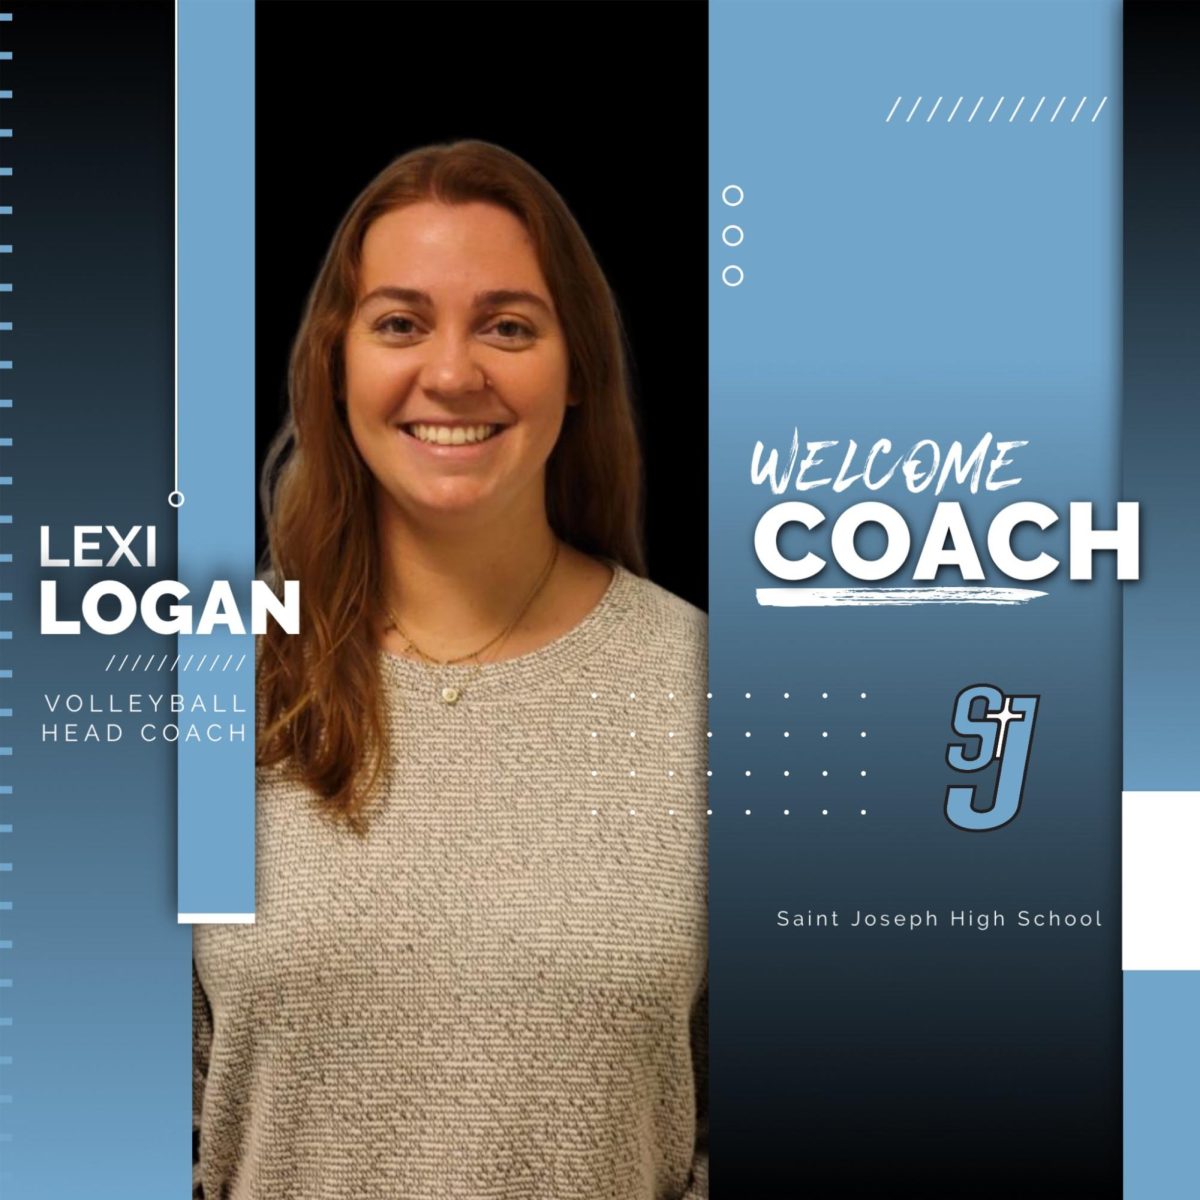 Lets get to know Coach Lexi, the new head volleyball coach!